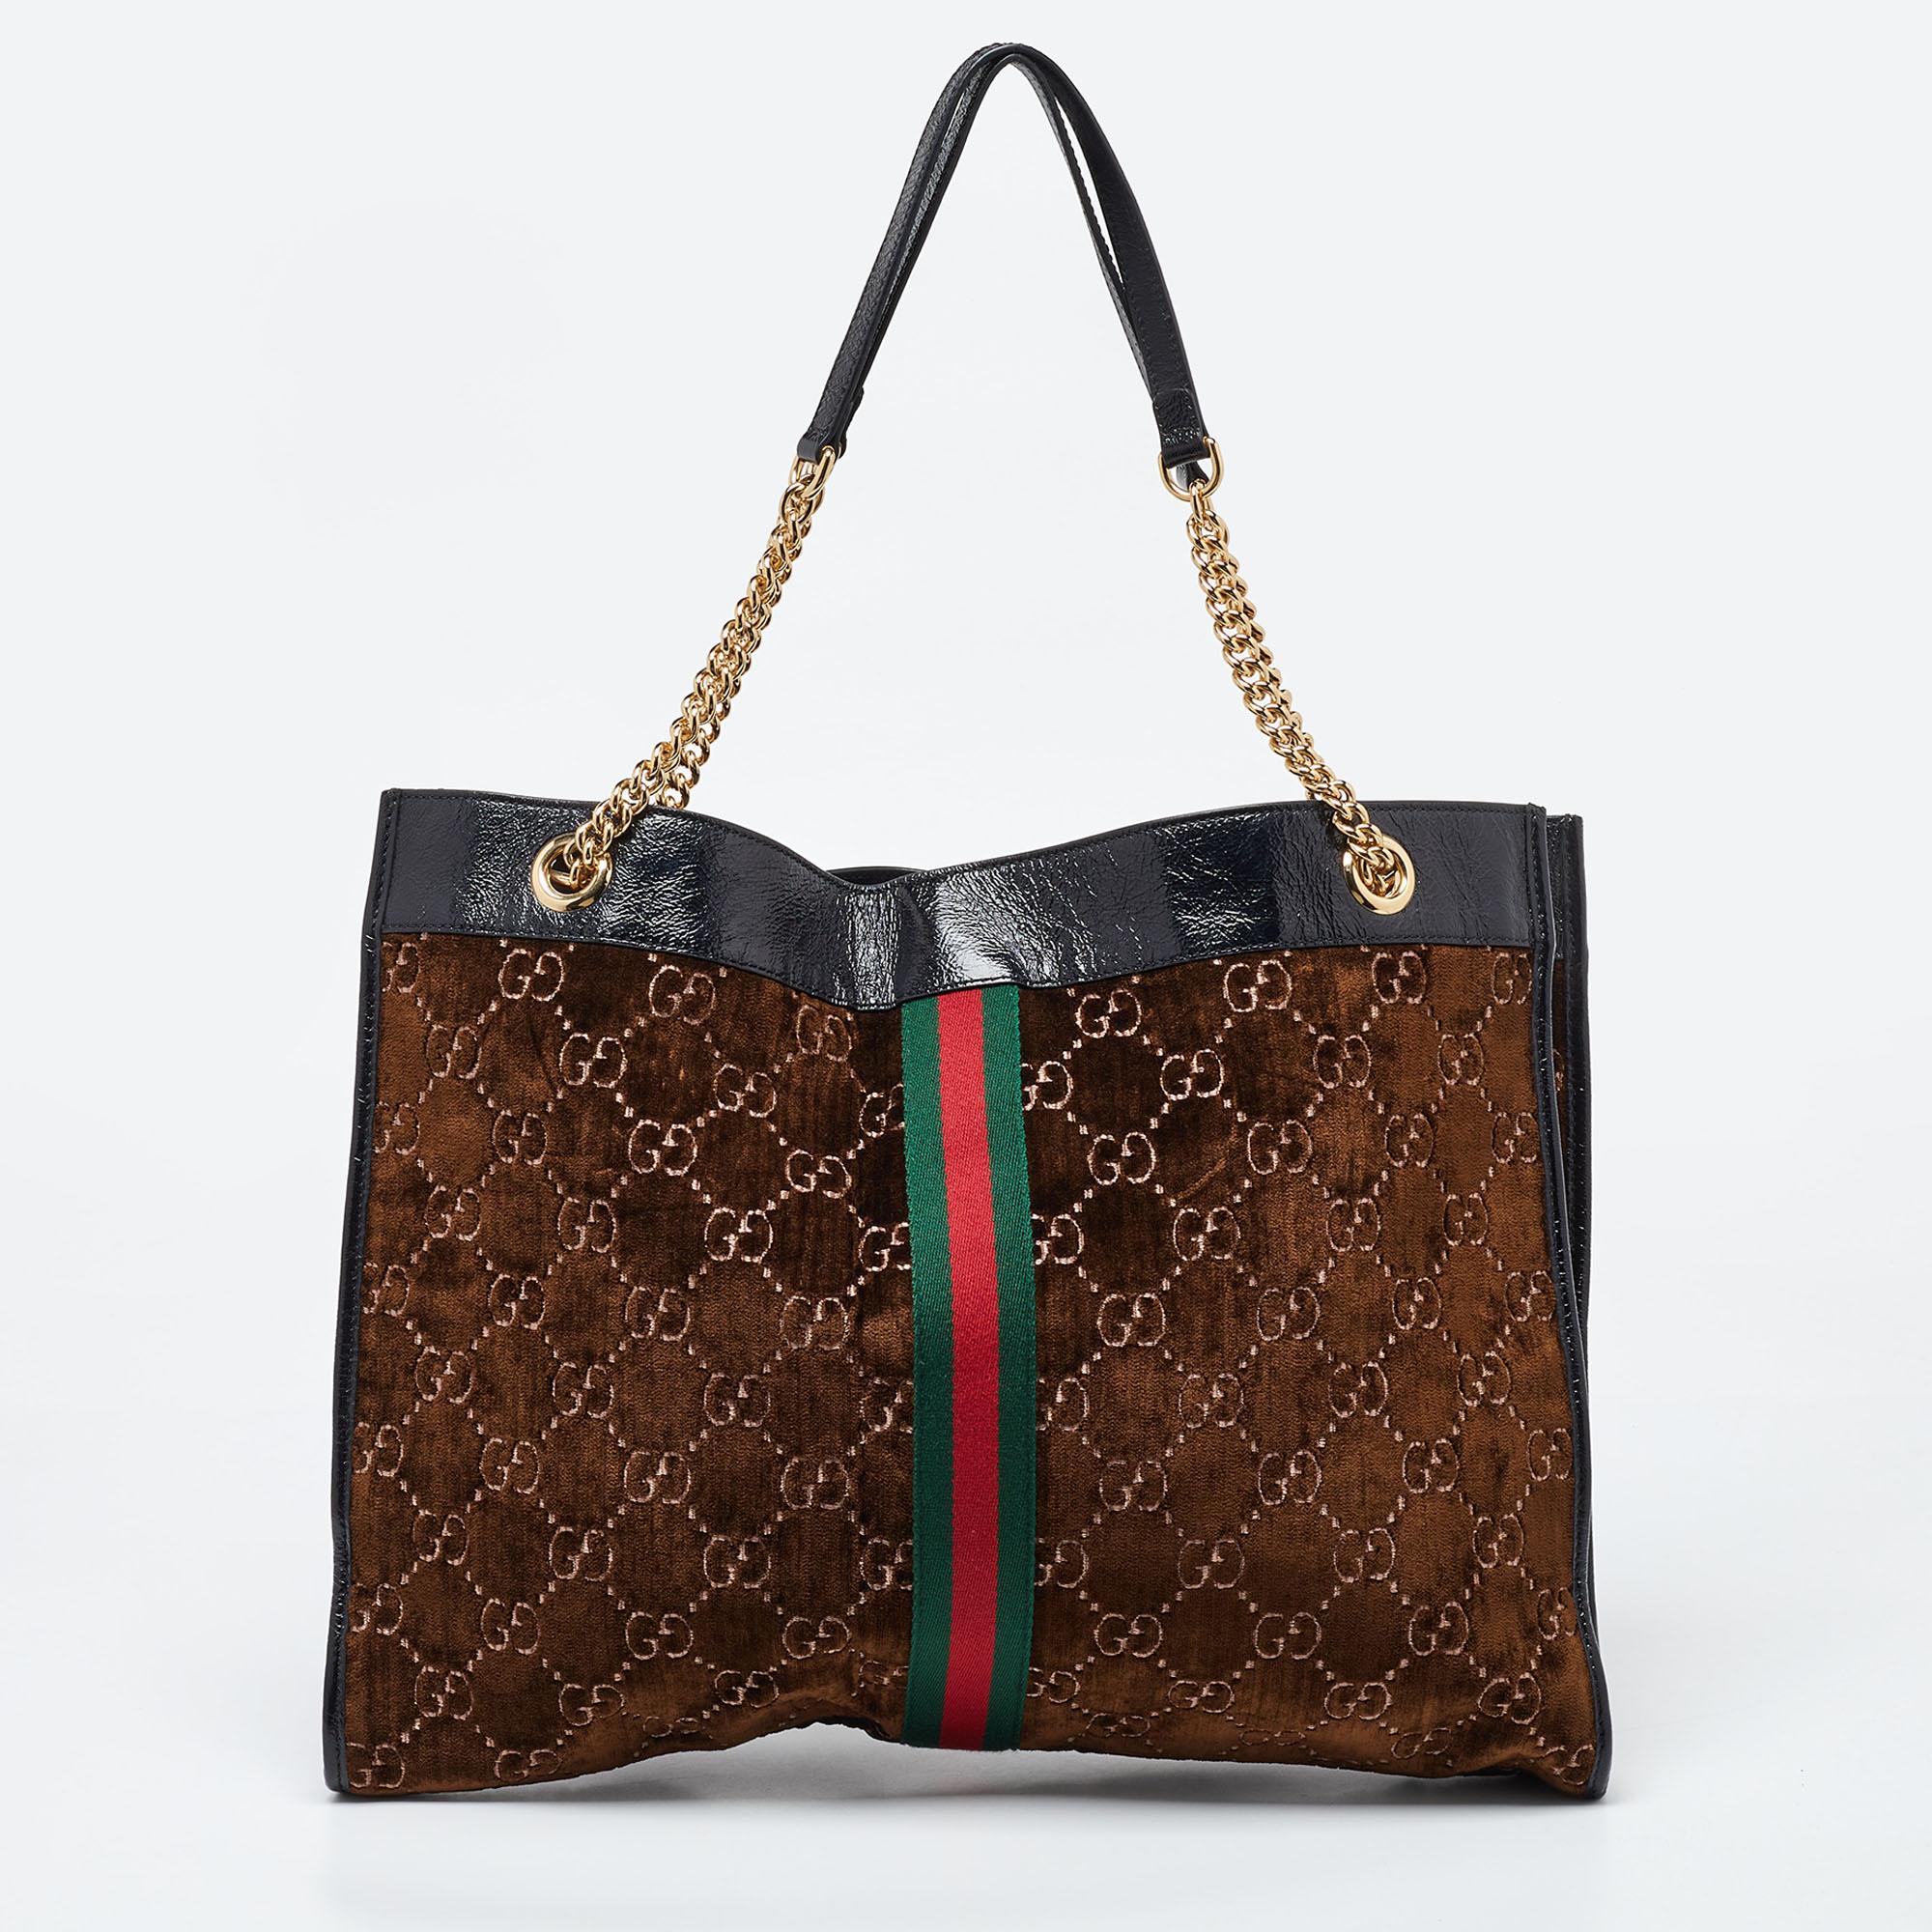 Channel your love for luxurious styles with this Rajah tote by Gucci. The well-sized Alcantara interior and the dual shoulder handles make this bag functional. It is finished with recognizable House codes and gold-tone hardware.

Includes: Original